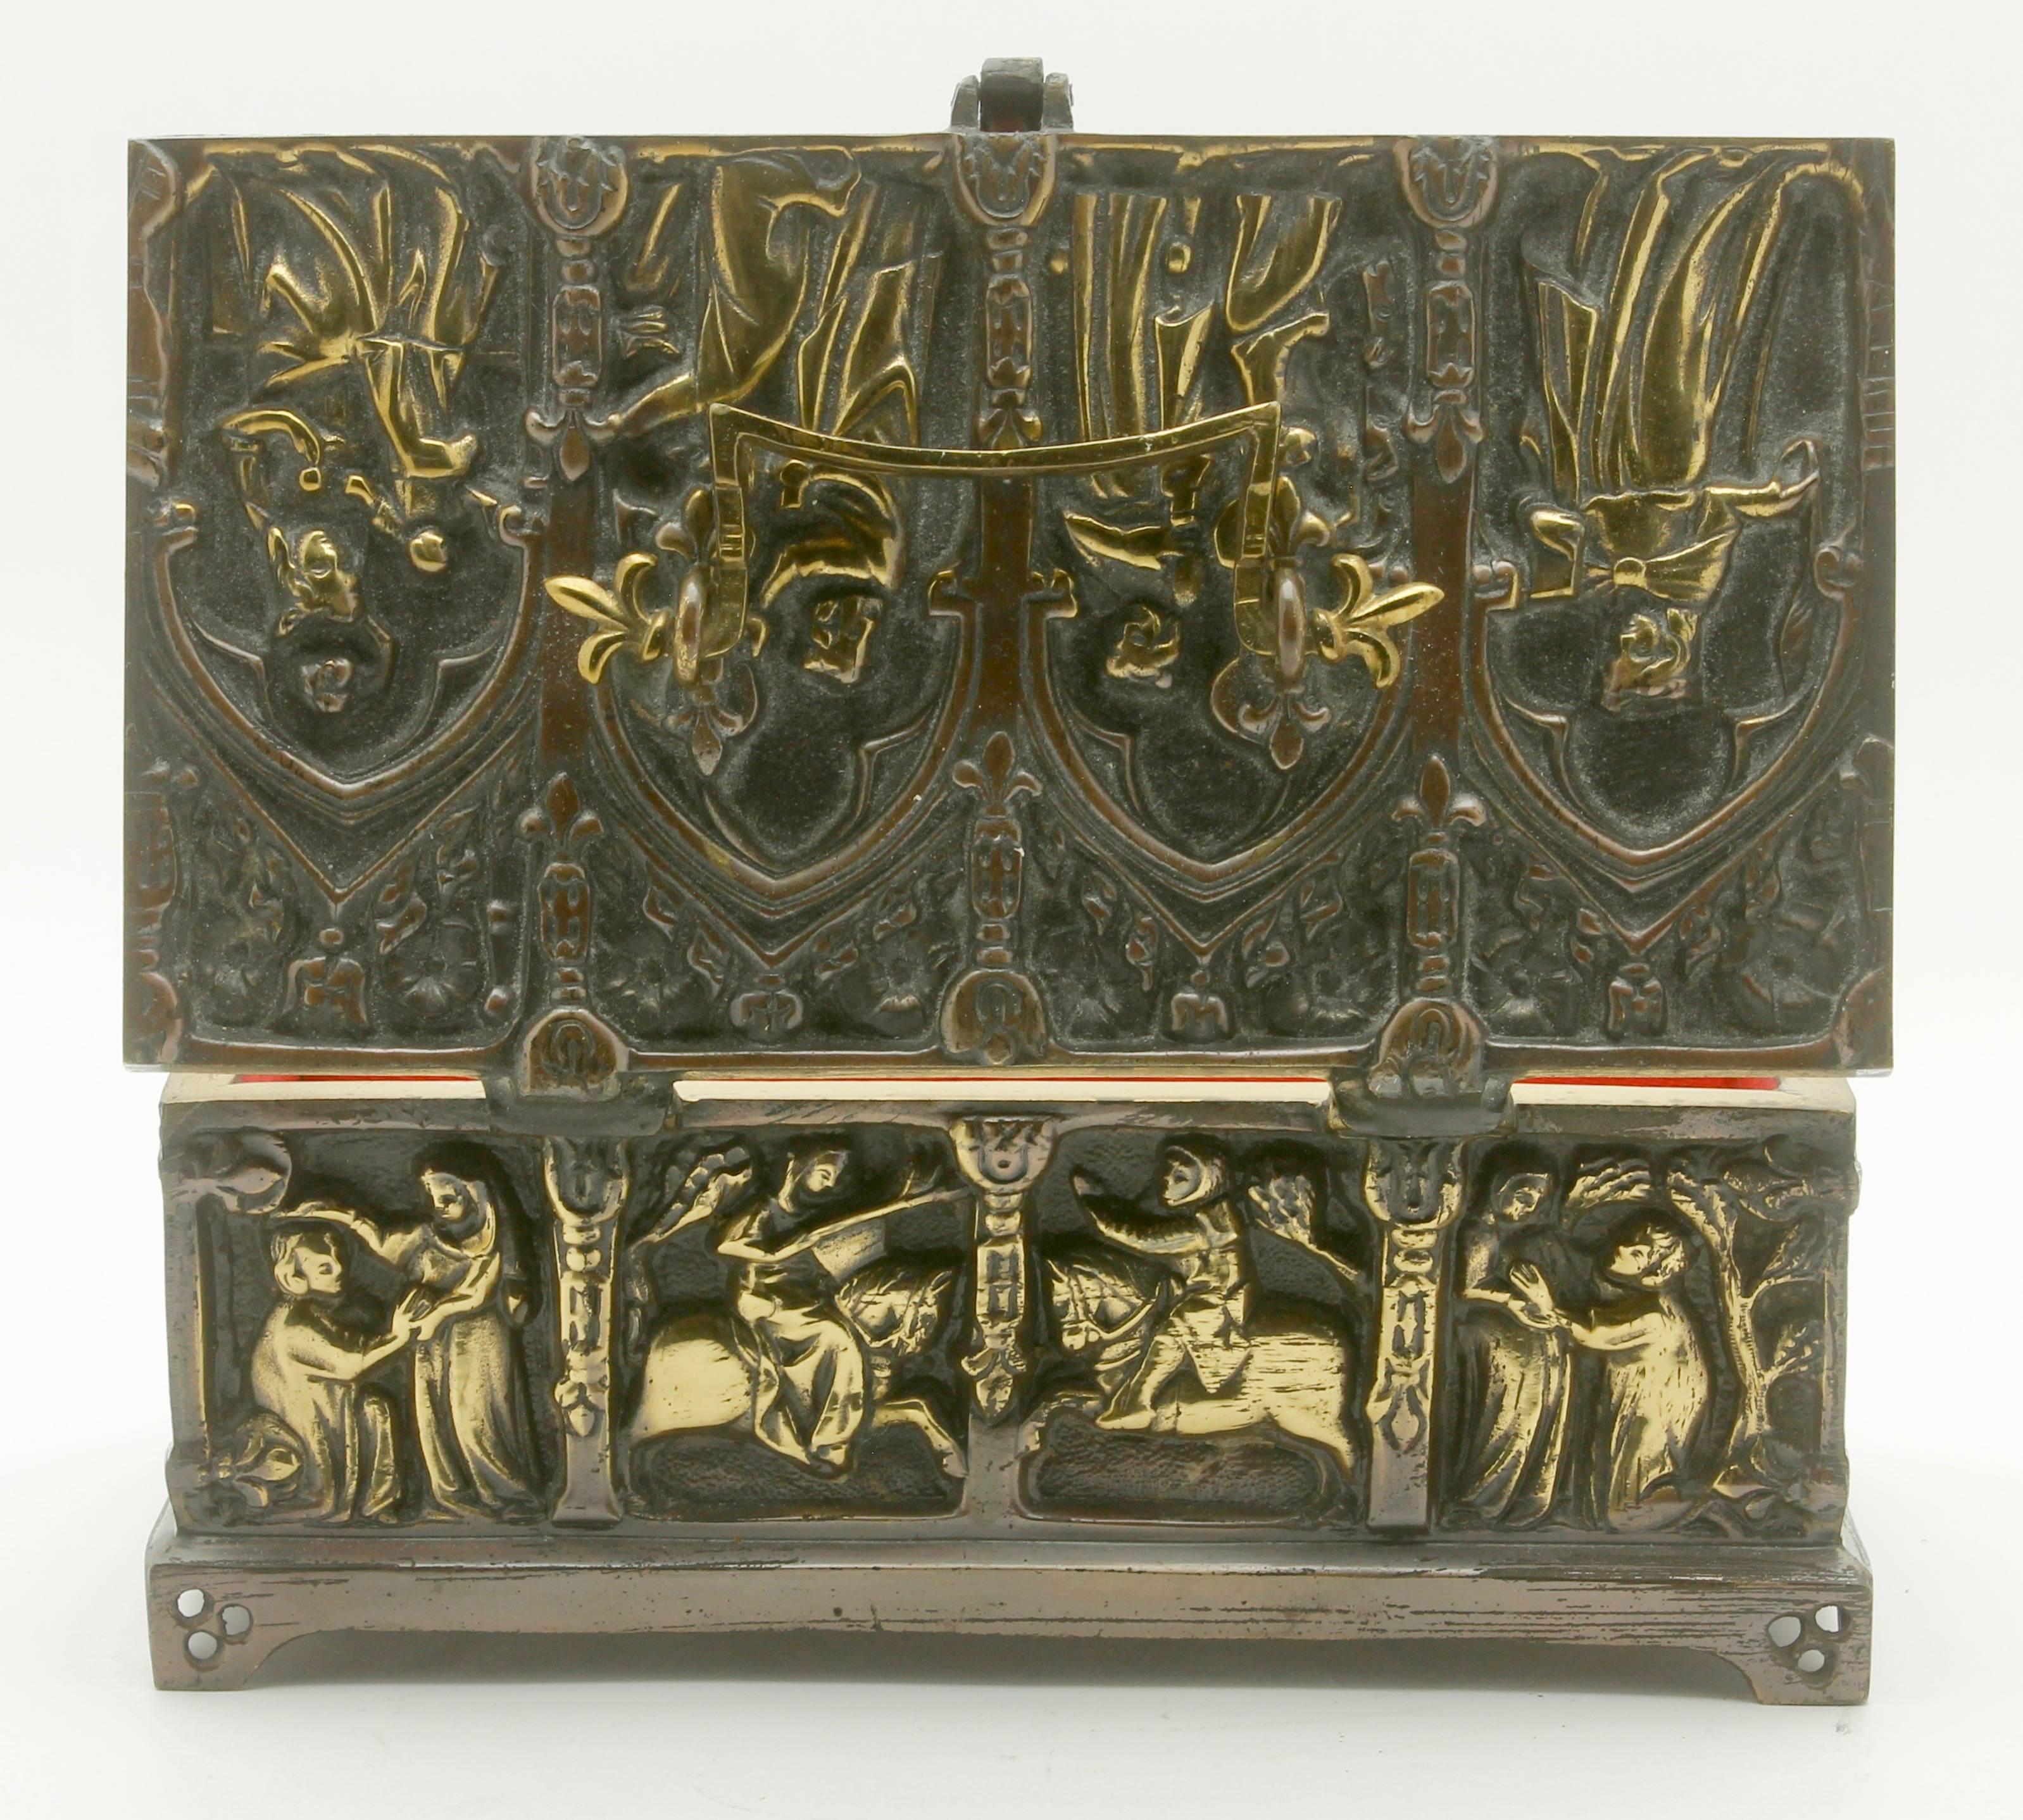 The top, front, sides and back are beautifully cast in gilt bronze and feature panels of medieval scenes of revellers hunting and feasting.
Good condition with typical marks and wear for an item of this age.
The interior is lined with red silk,